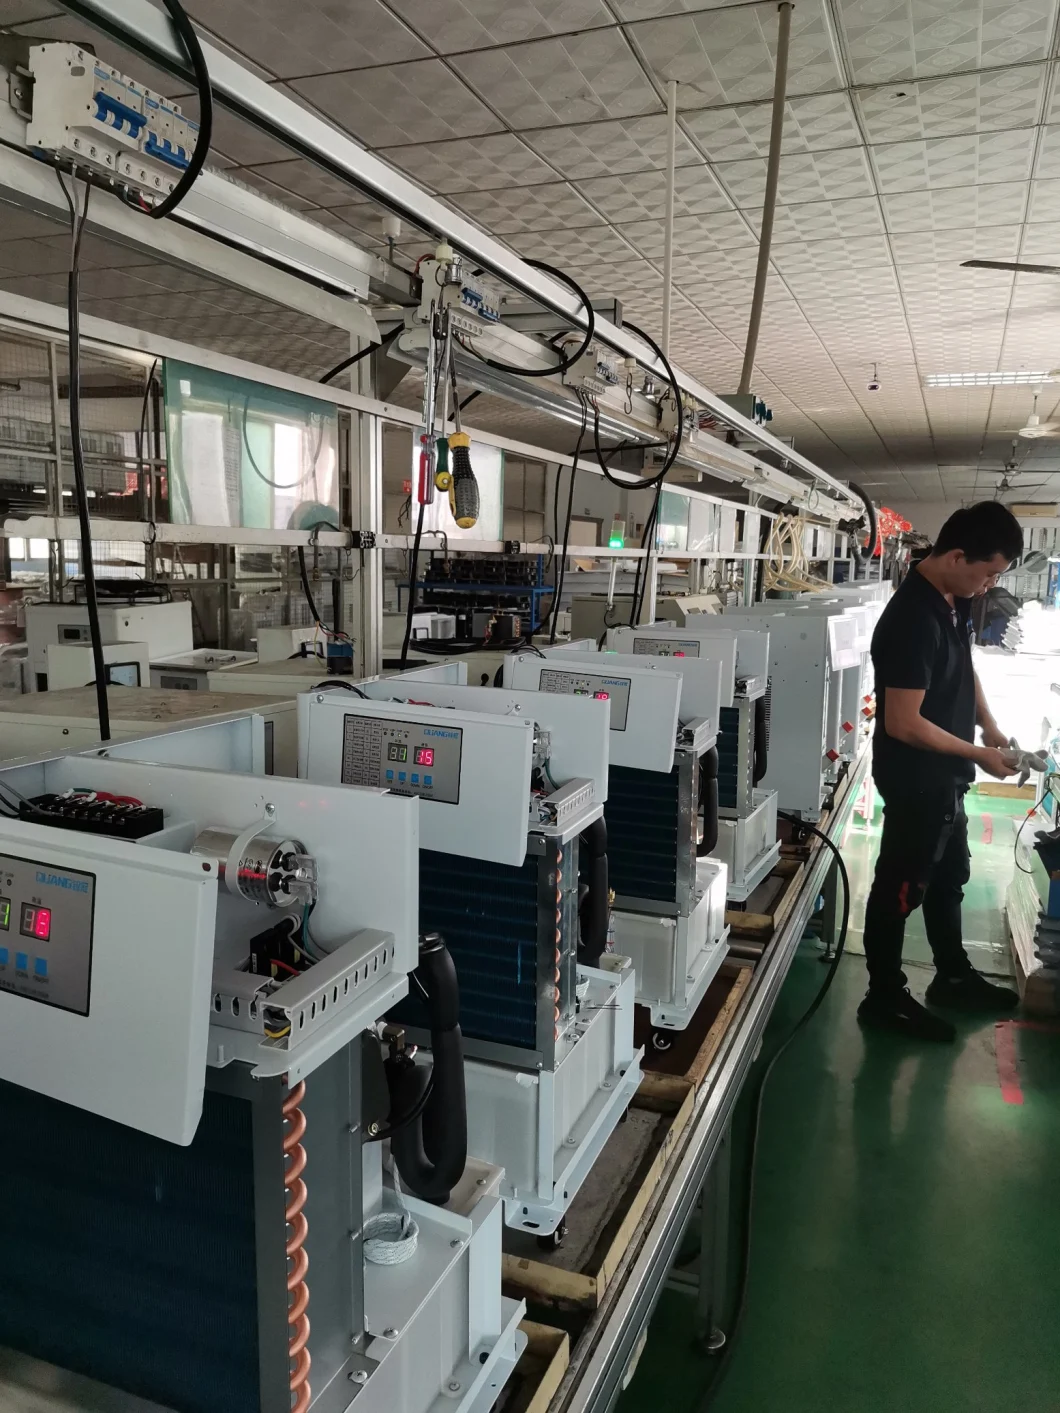 Air Cooled Laser Water Chiller Laser Cooler High Quality Assurance for CNC Machinery Qg-3000sf